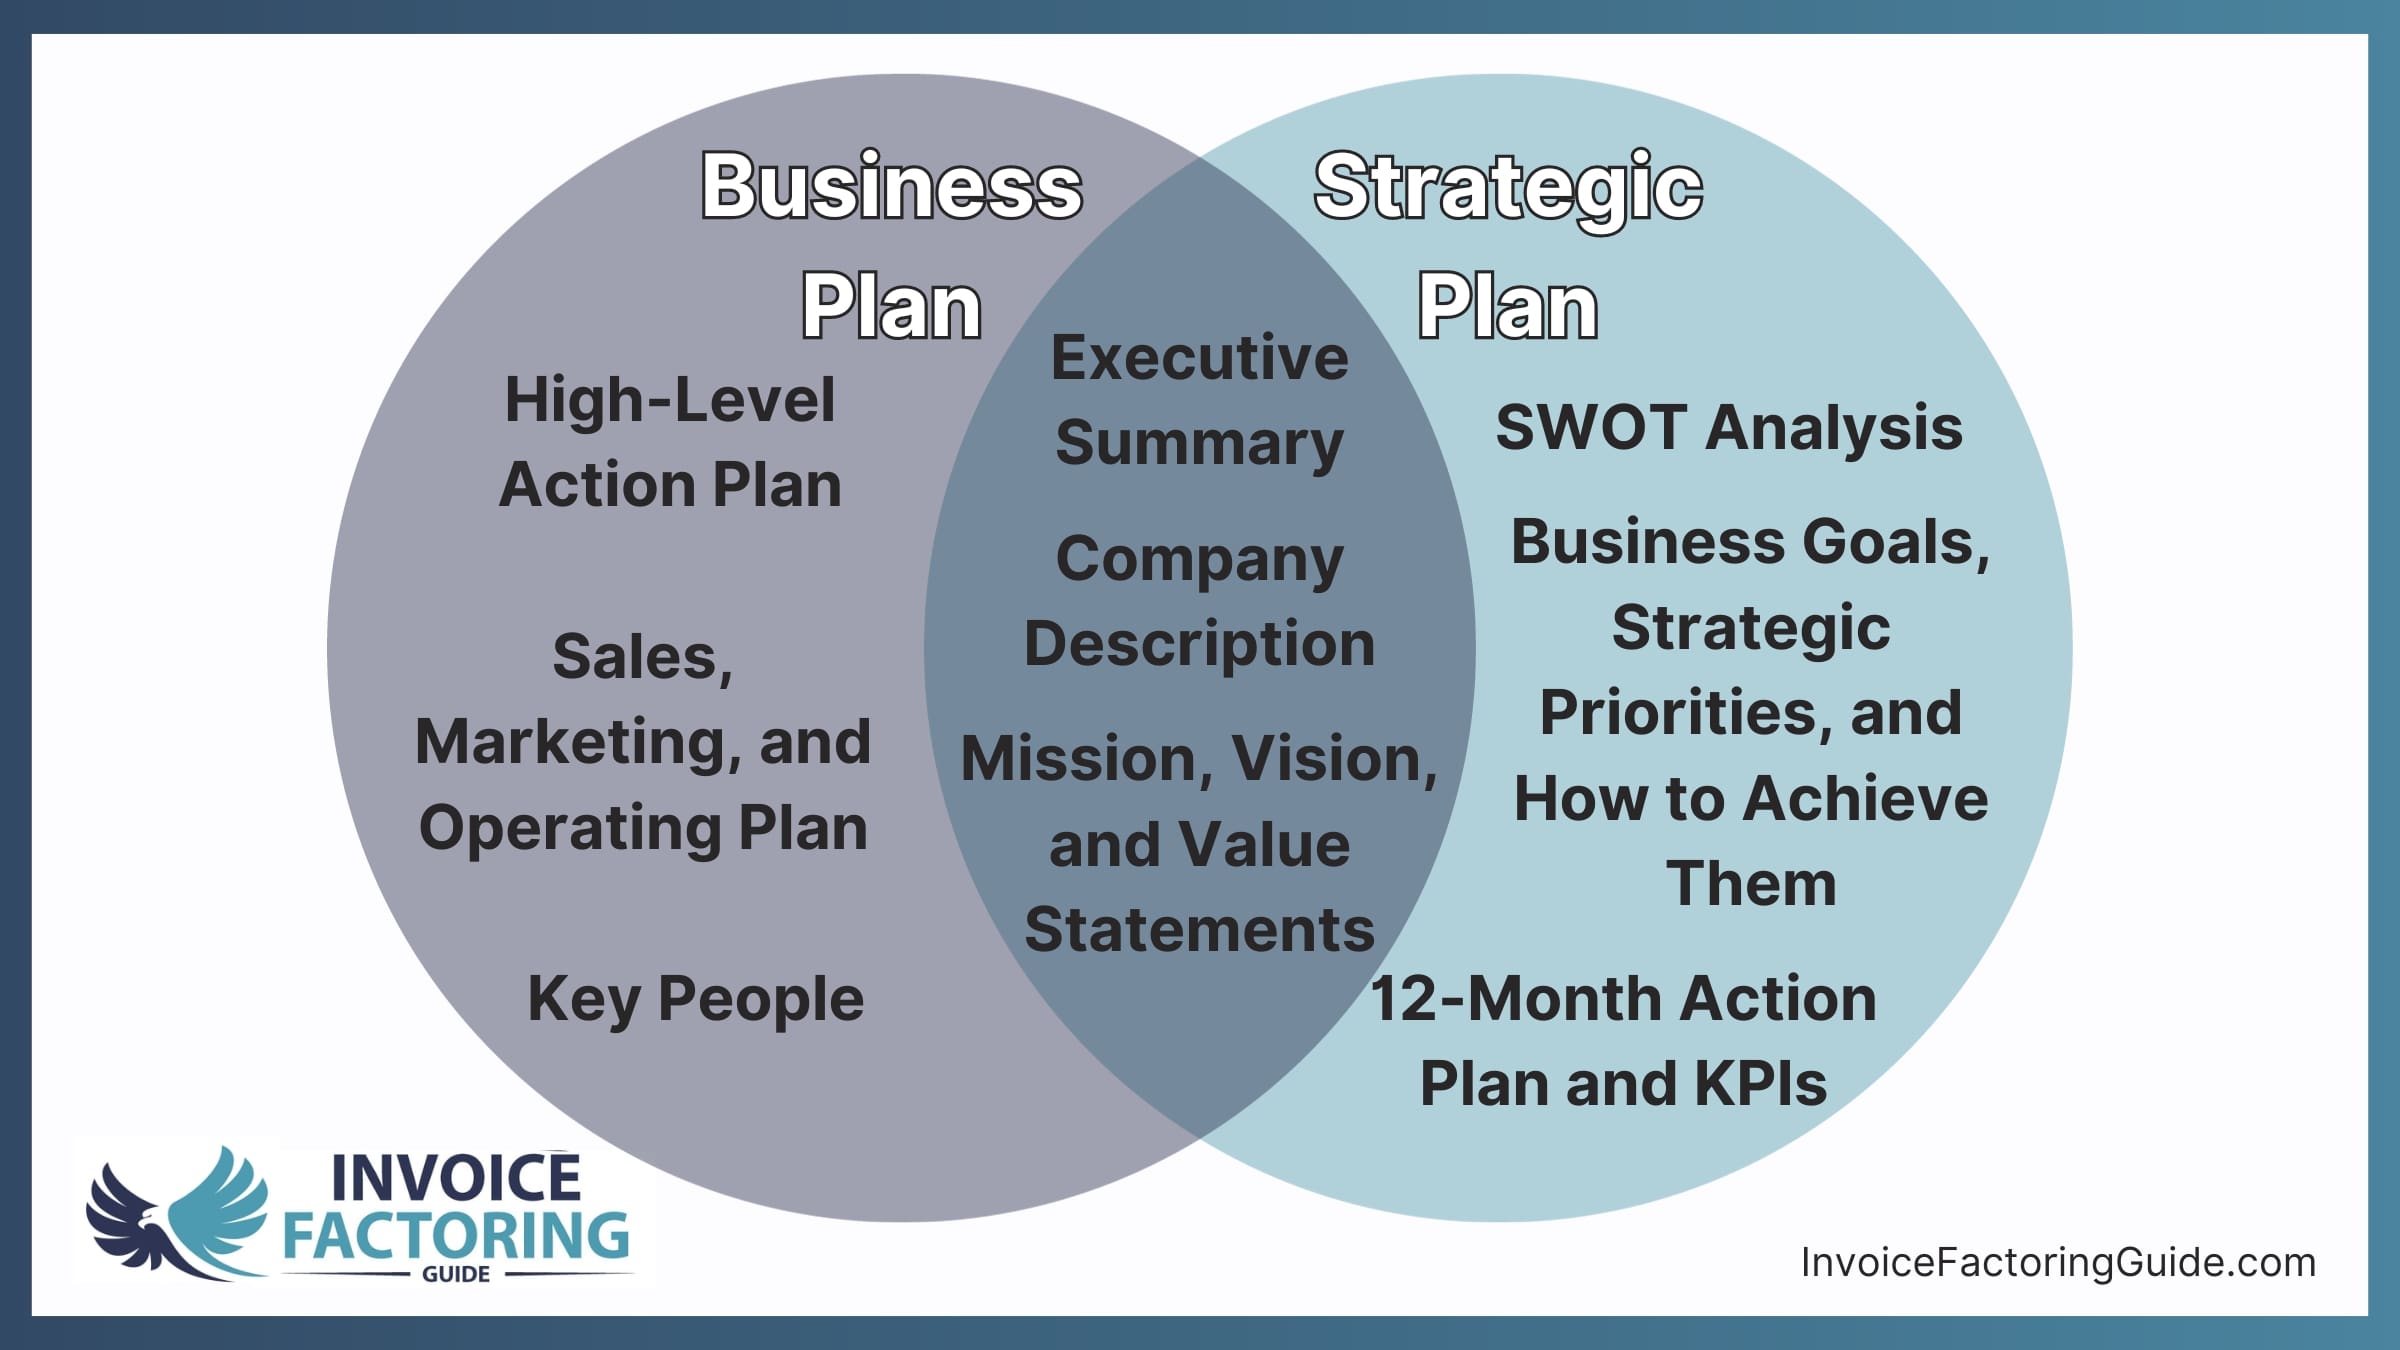 Create or Review Your Business Plan and Strategic Plan